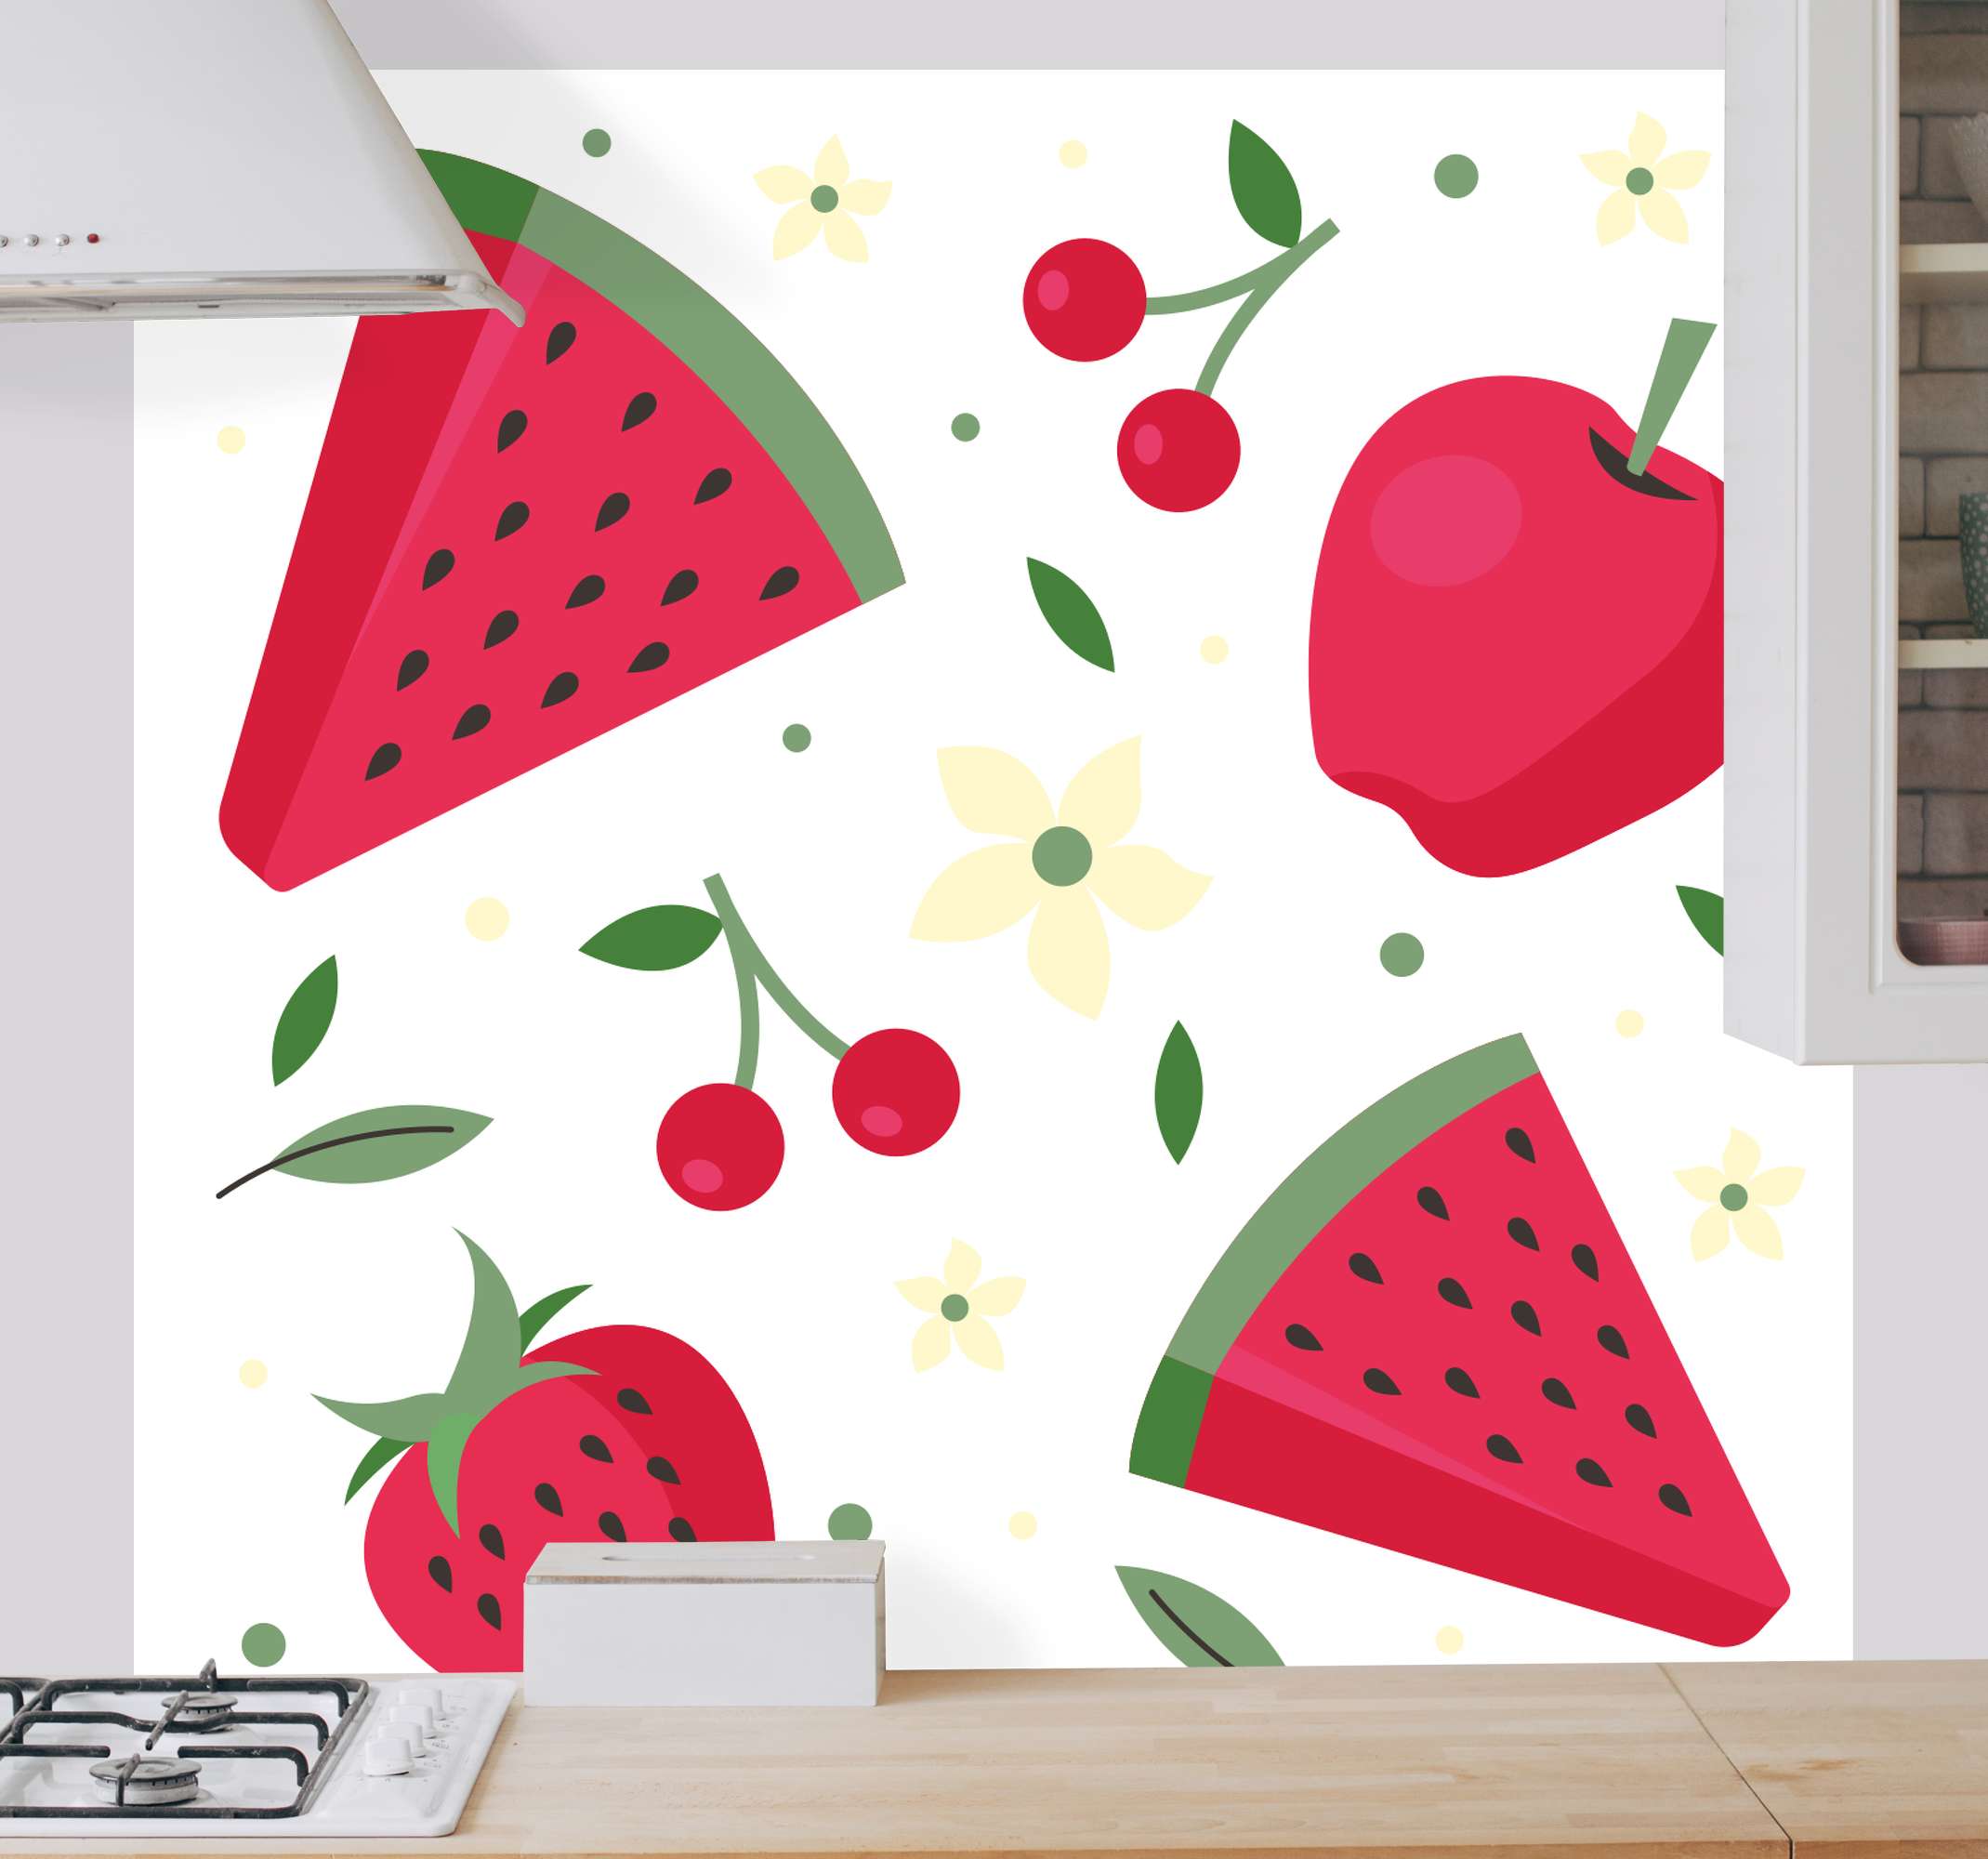 Colorful plant print window decal - TenStickers